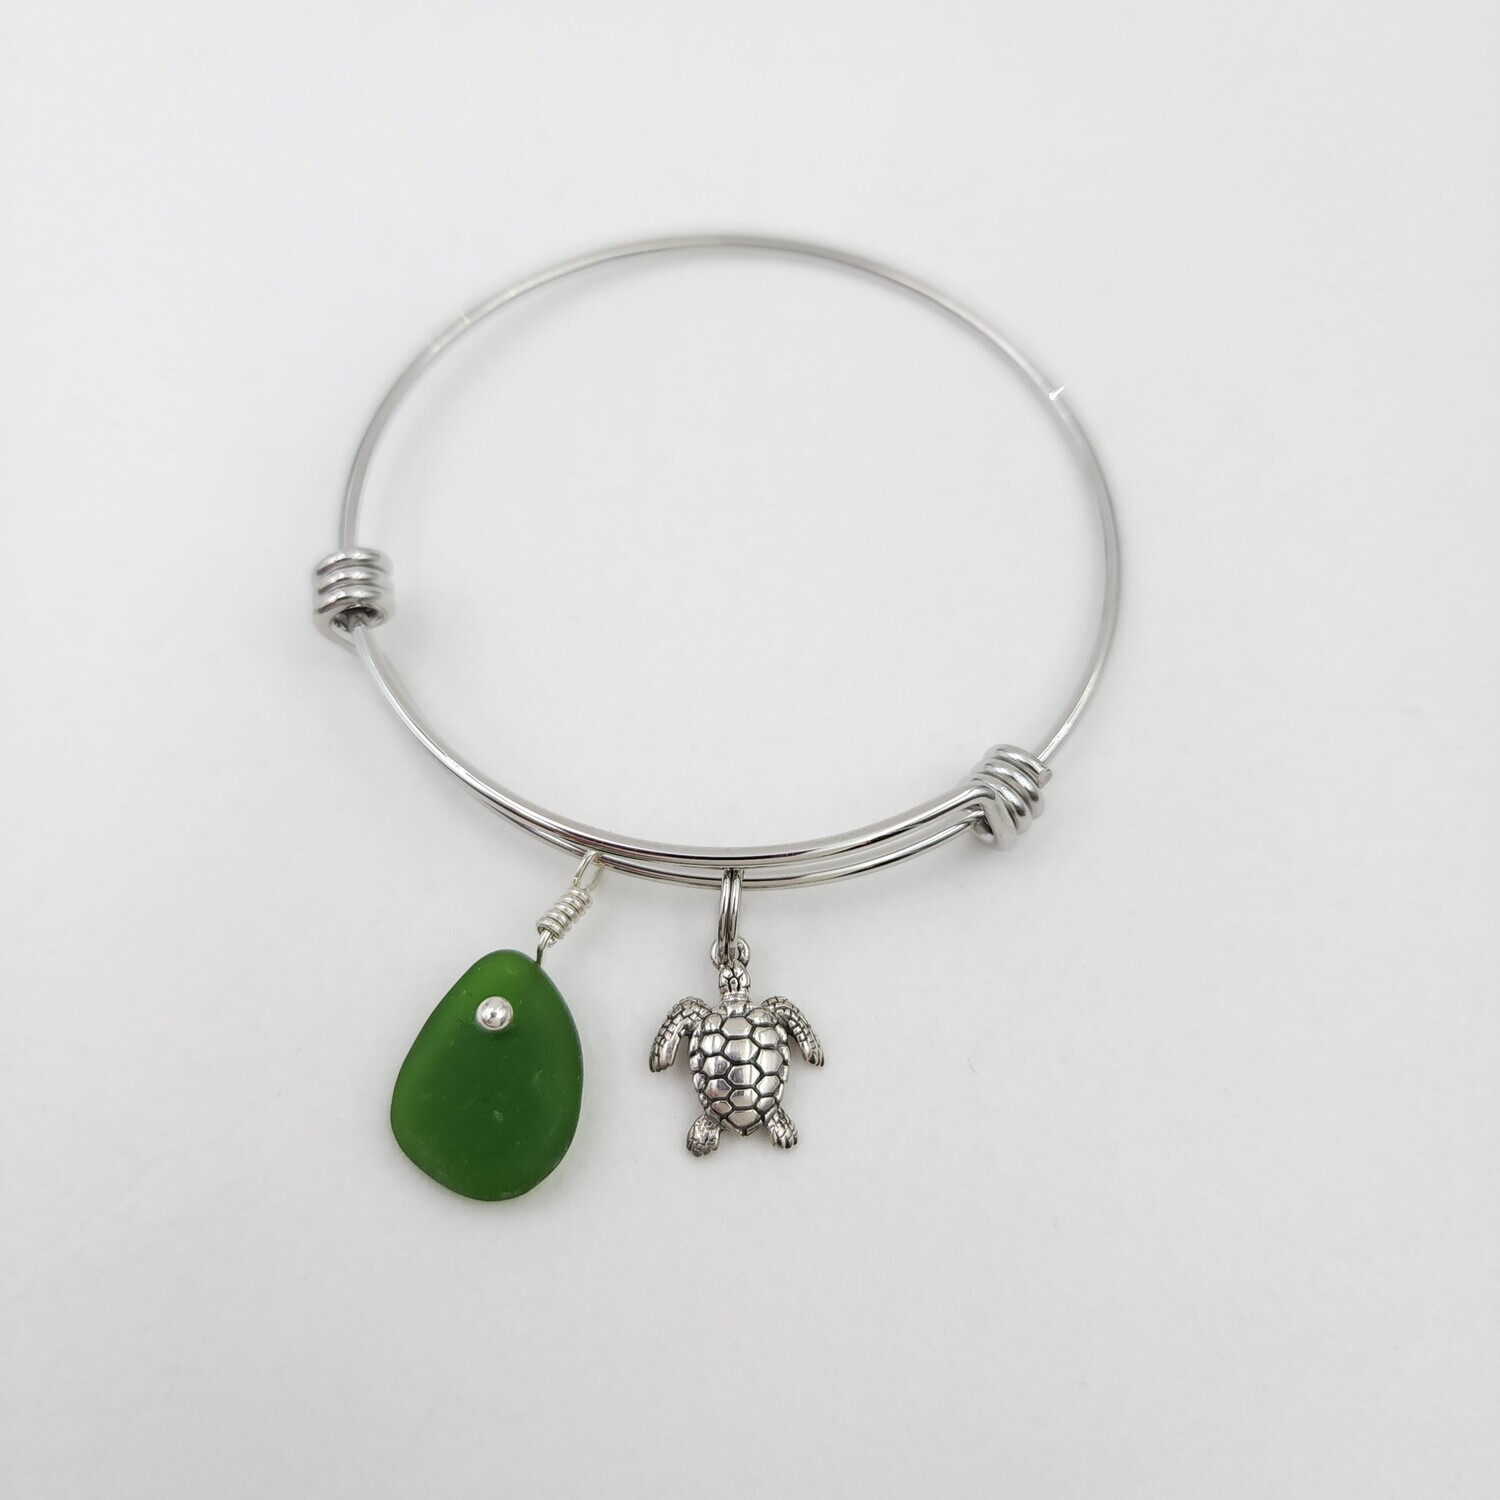 Bangle Bracelet with Sea Turtle Charm and Forest Green Lake Erie Beach Glass